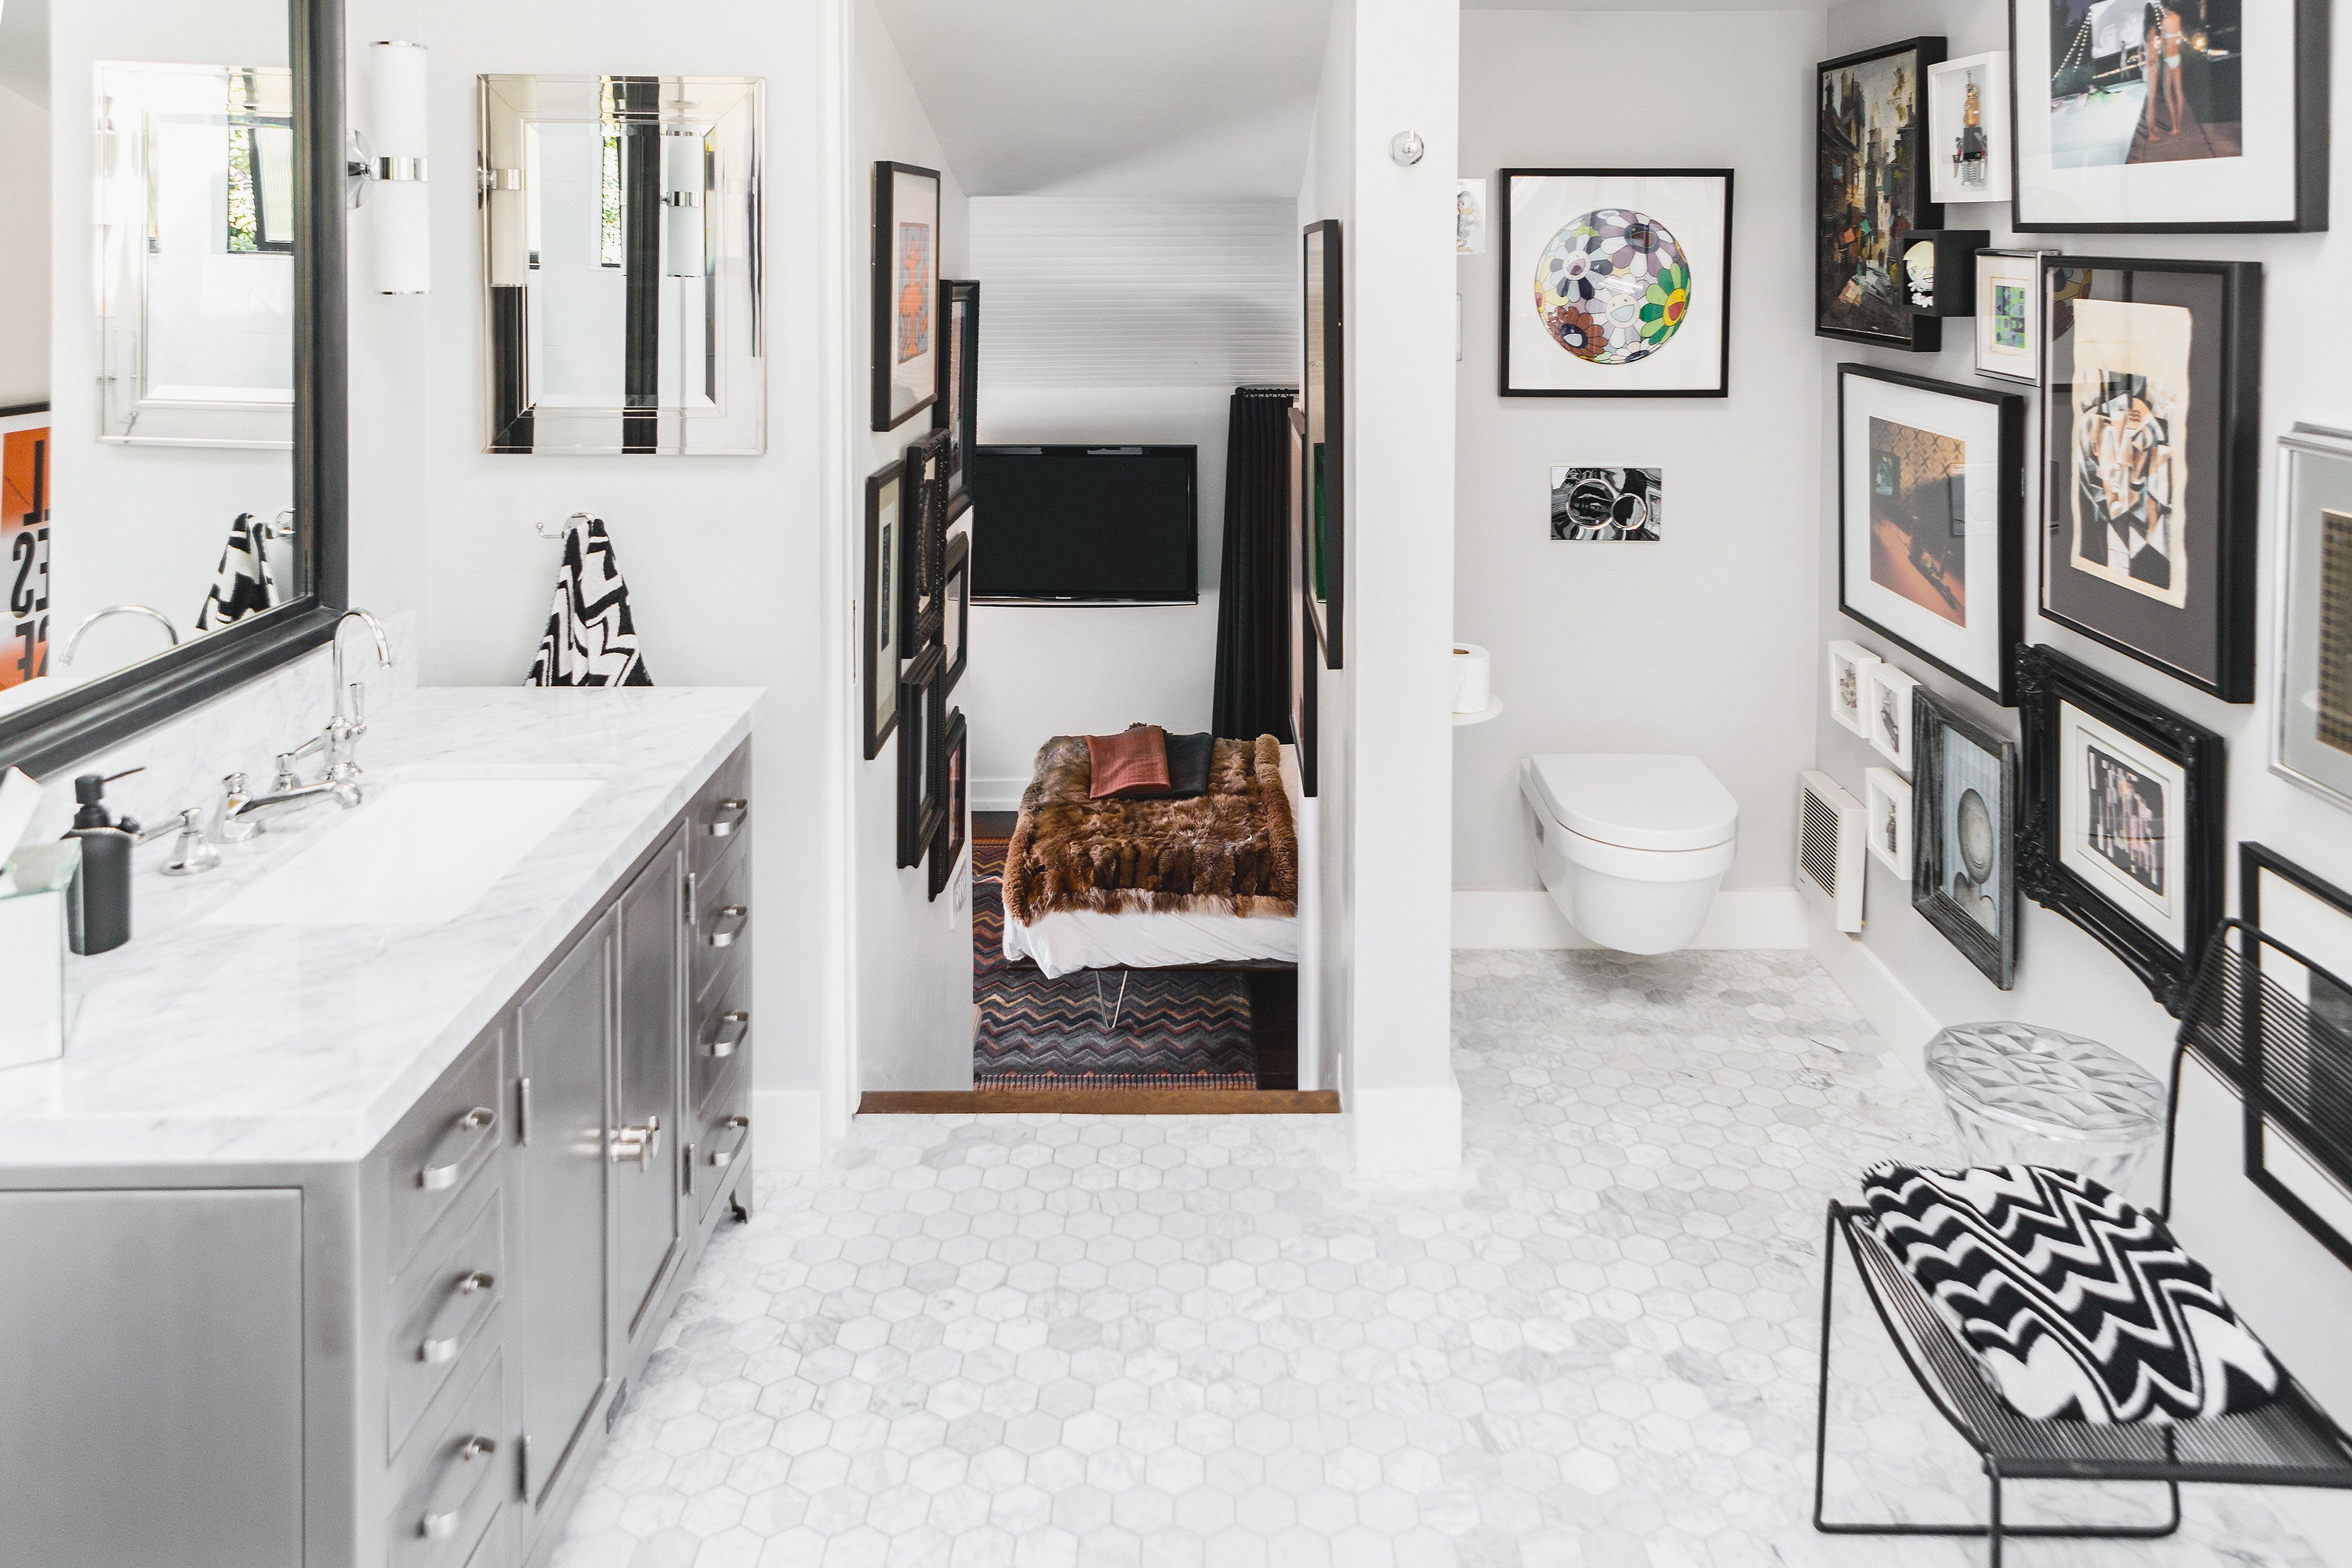 This LA Home Will Make You Want a Gallery Wall in Your Bathroom